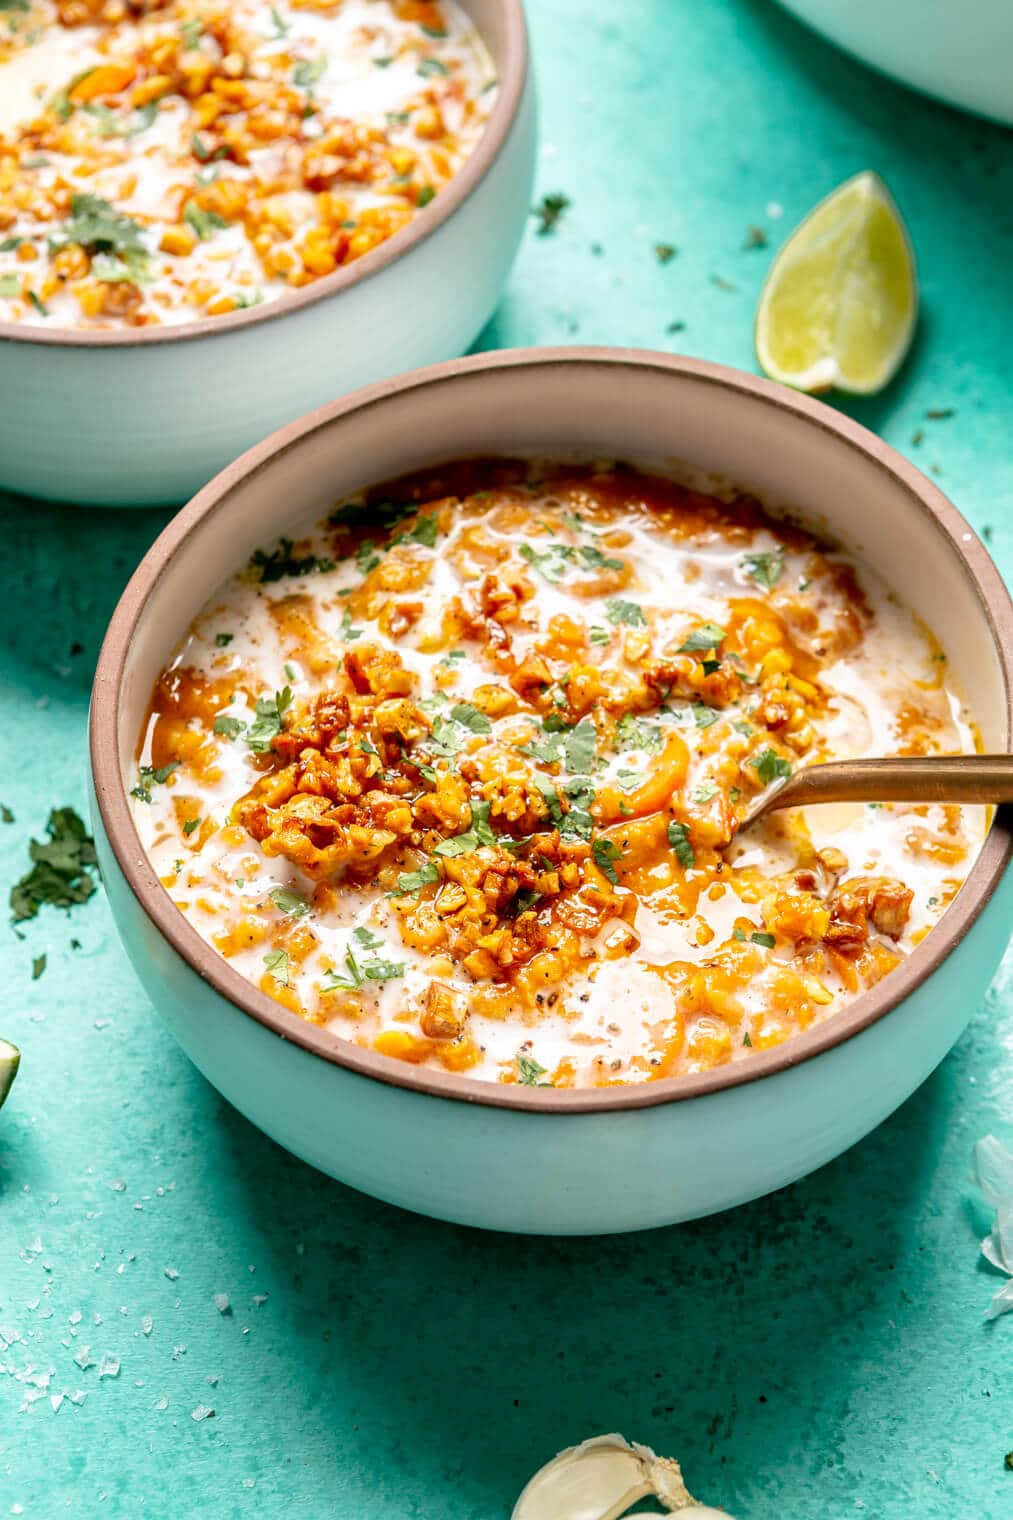 Red lentil soup topped with drizzle of coconut milk, chopped cilantro, and garlic in a white bowl with bronze rim on a turquoise surface with a squeezed lime wedge and sprinkles of chopped cilantro.